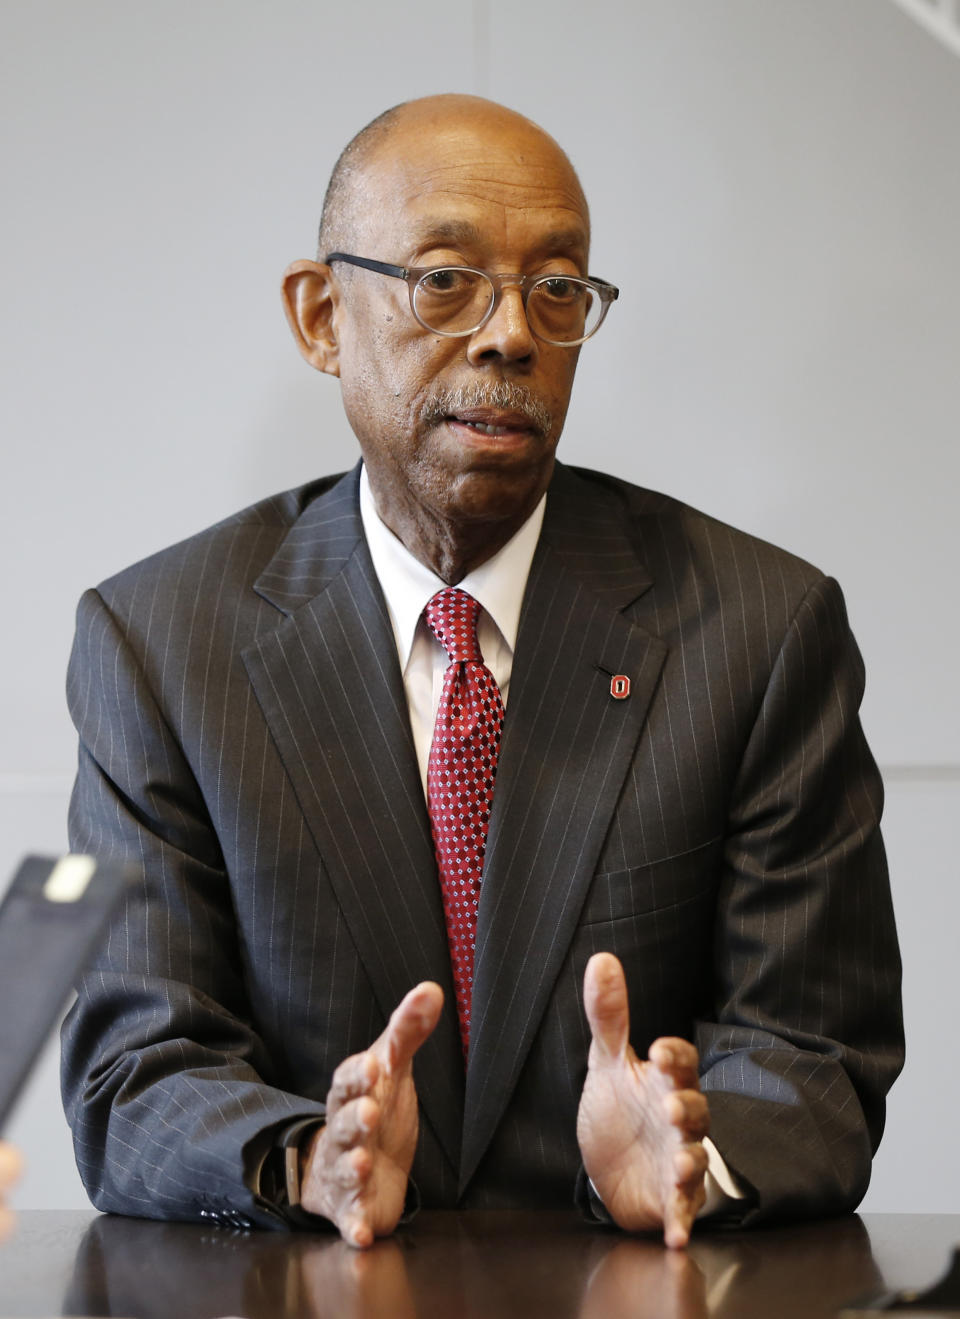 Ohio State University president Michael Drake answers questions during an interview about the accusations against former Ohio State team doctor Richard Strauss Friday, May 17, 2019, in Columbus, Ohio. An investigation found that Strauss sexually abused at least 177 athletes from at least 16 sports as well as others from his work at the student health center and his off-campus clinic. (AP Photo/Jay LaPrete)